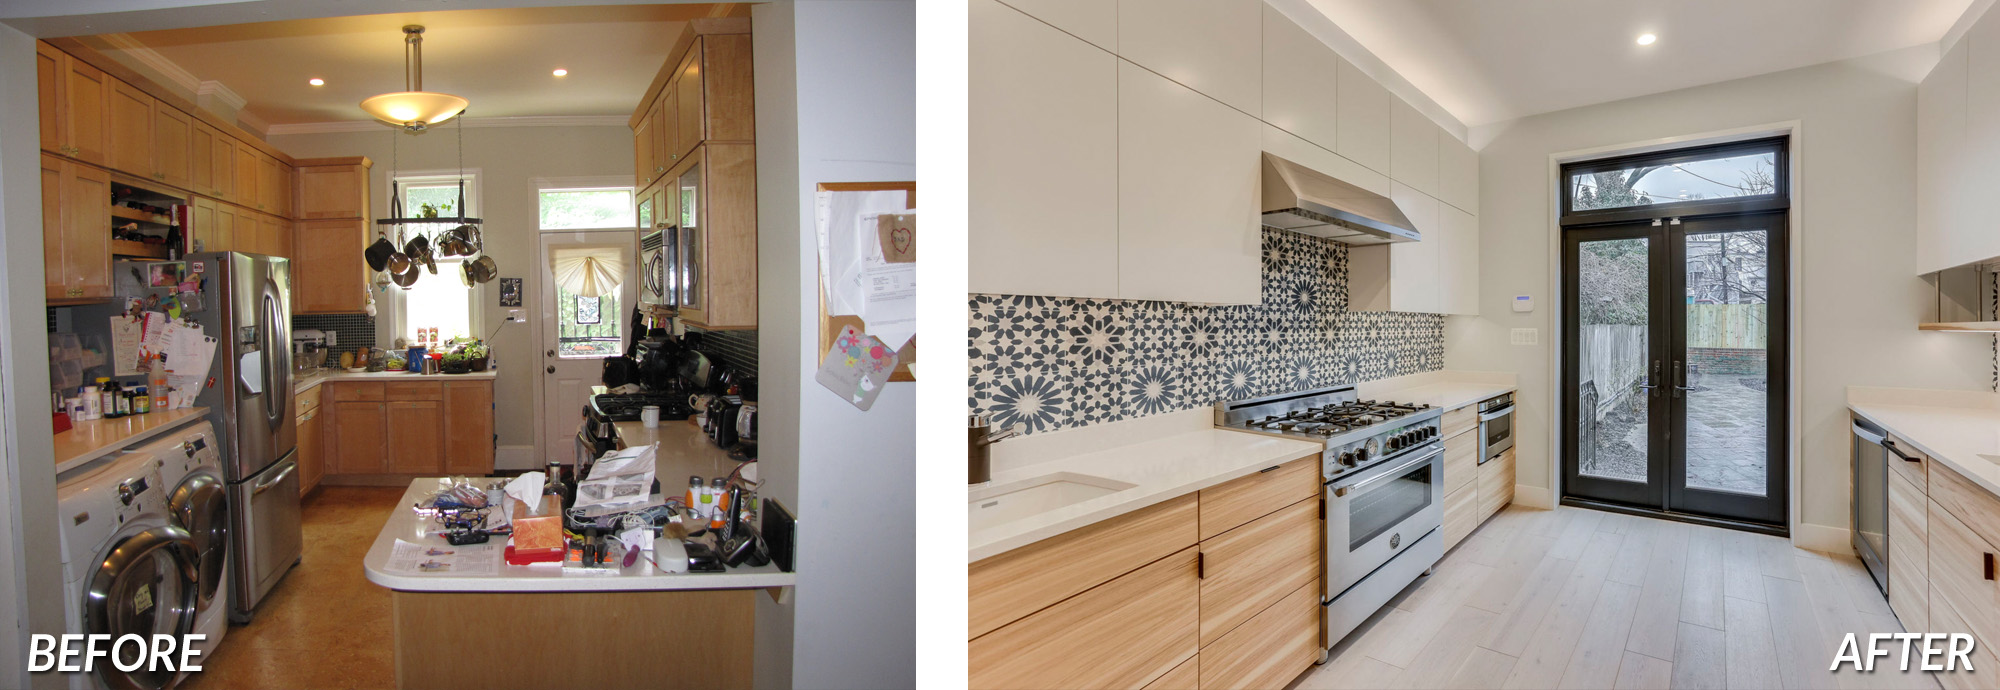 BOWA Design Design Build - DC Townhome Renovation Before & After